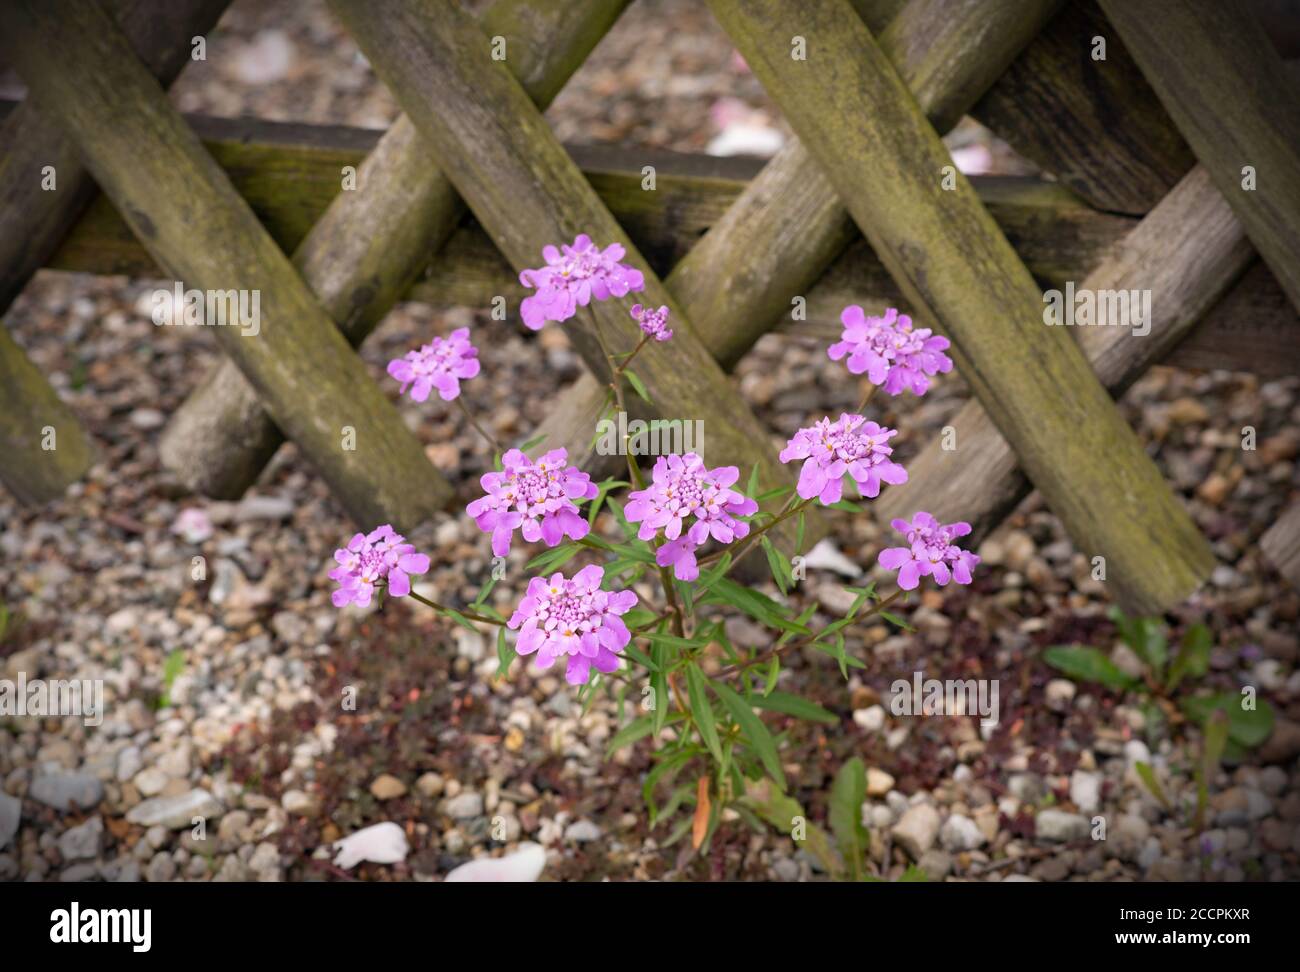 Iberis umbellata blooming near to the wooden fence. Pink flowers in the garden Stock Photo